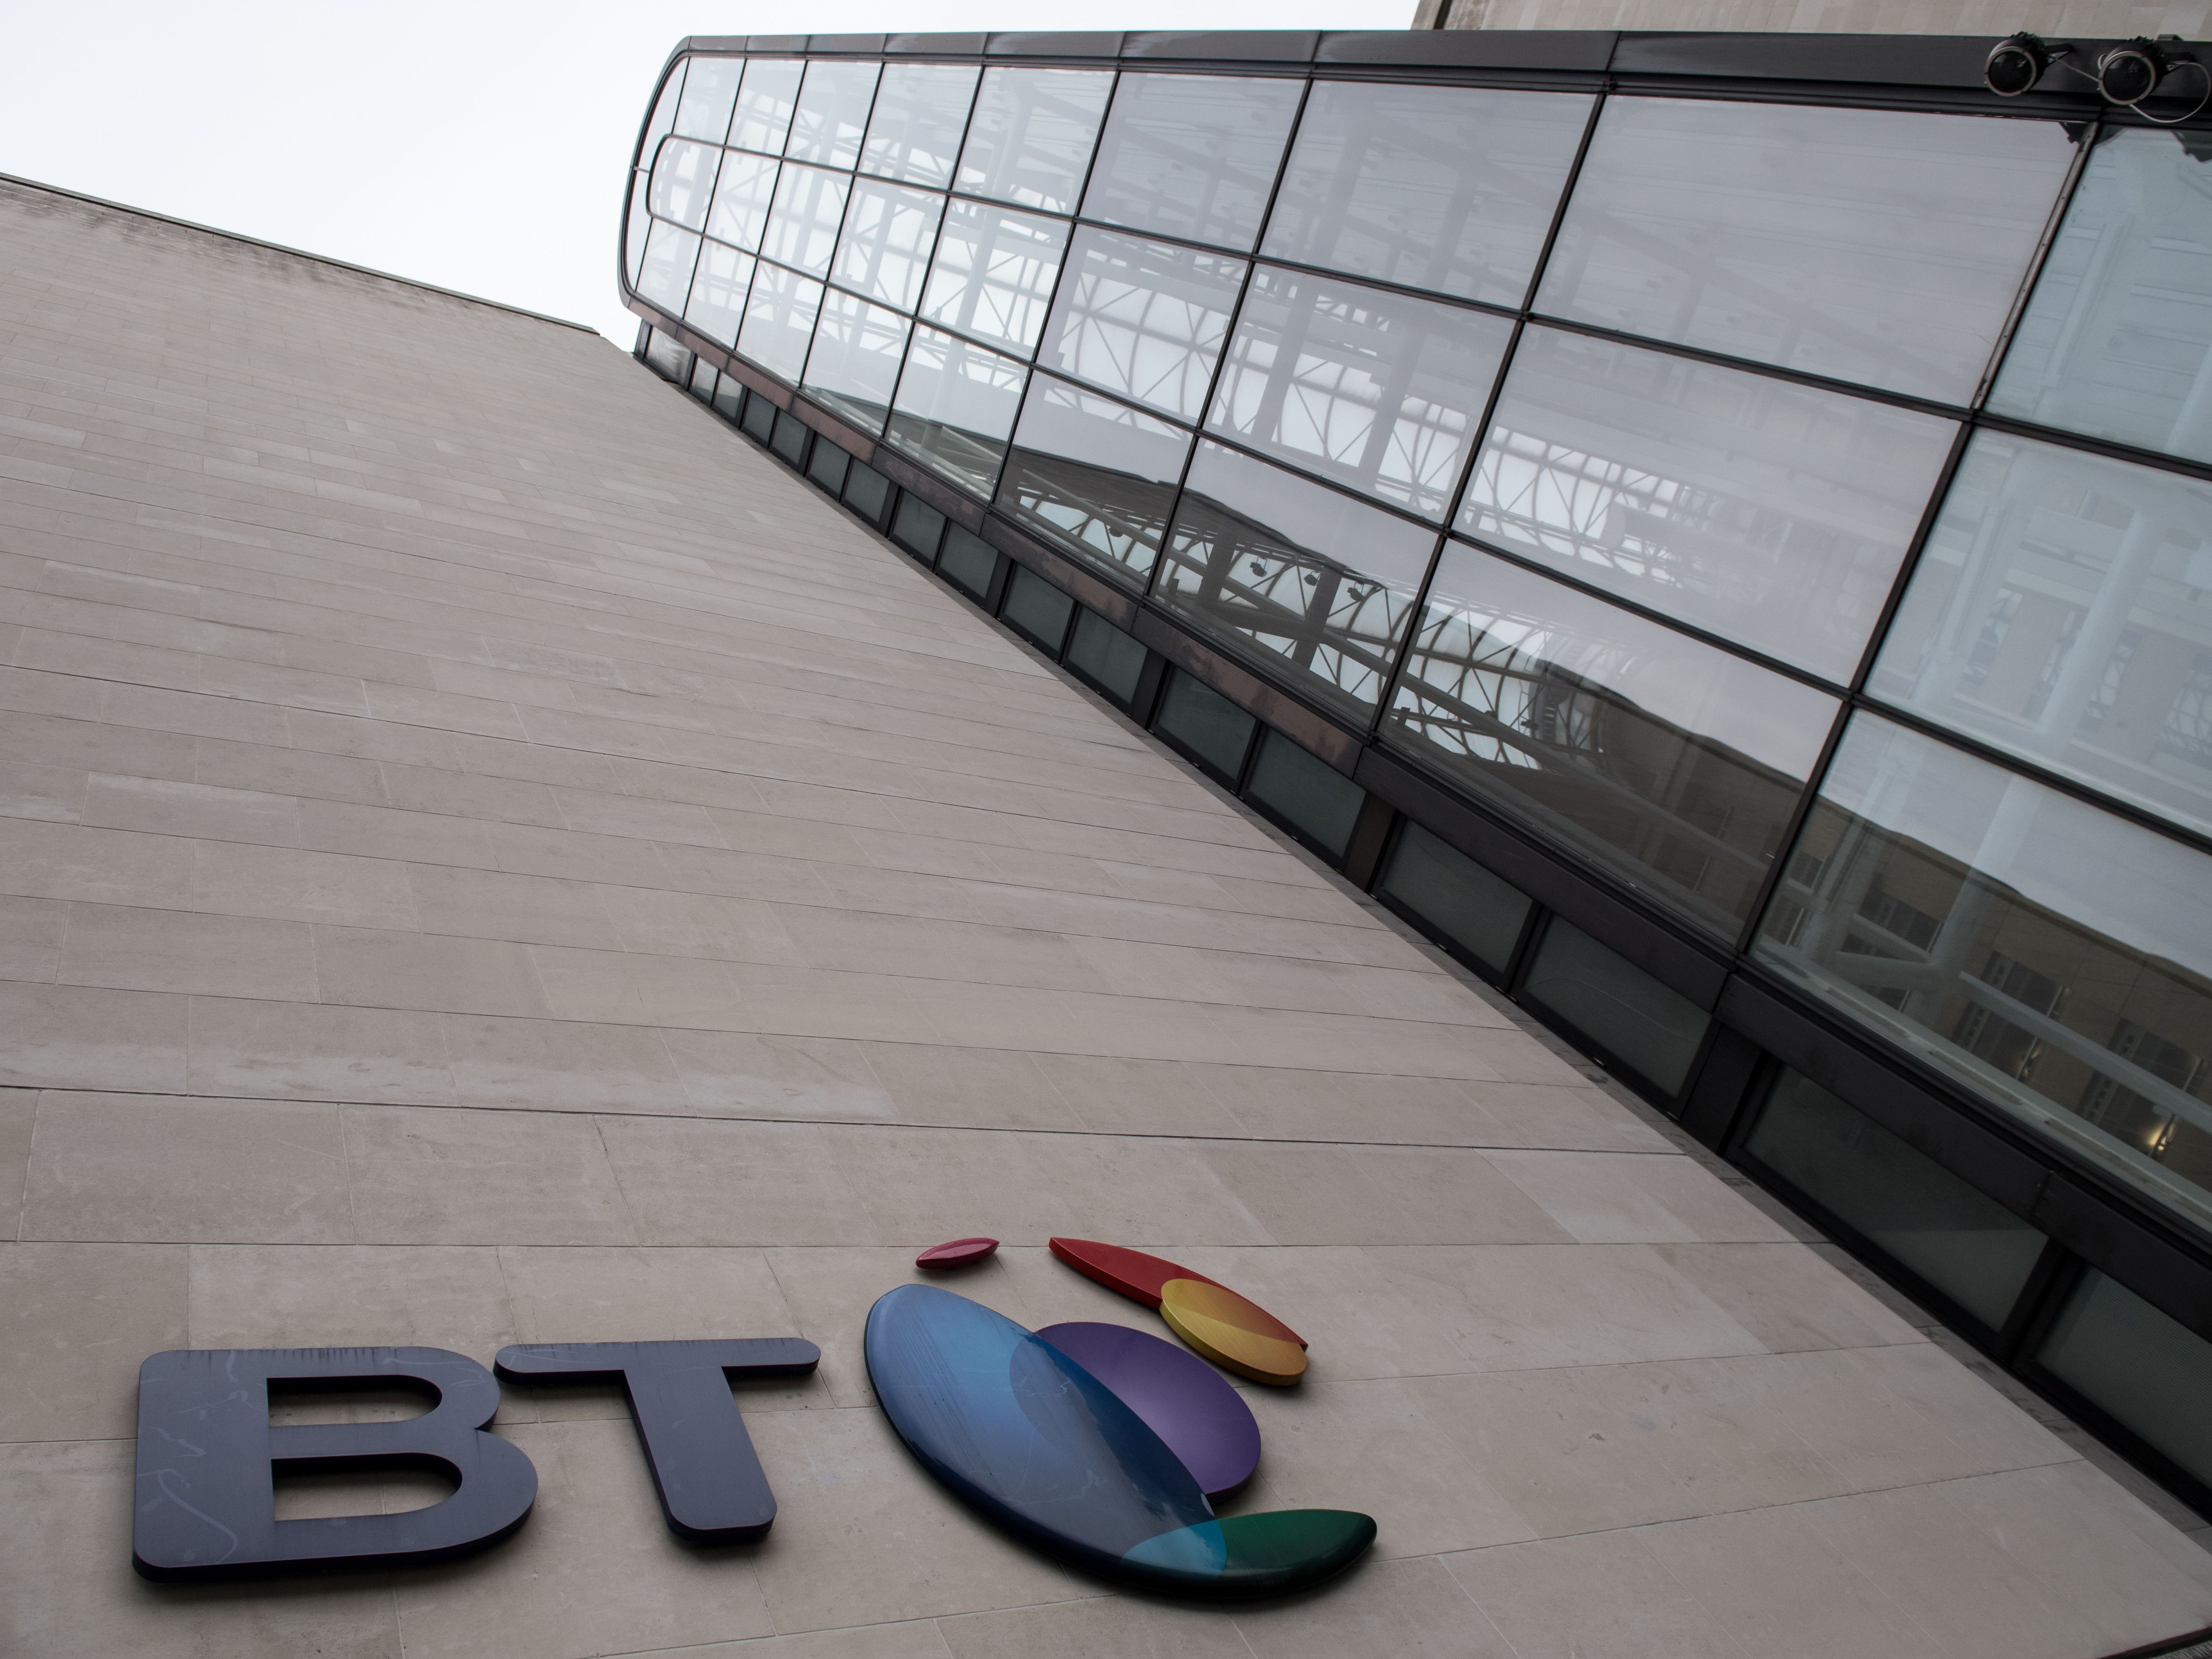 Some 95.8 per cent of BT Openreach workers voted in favour of the strike